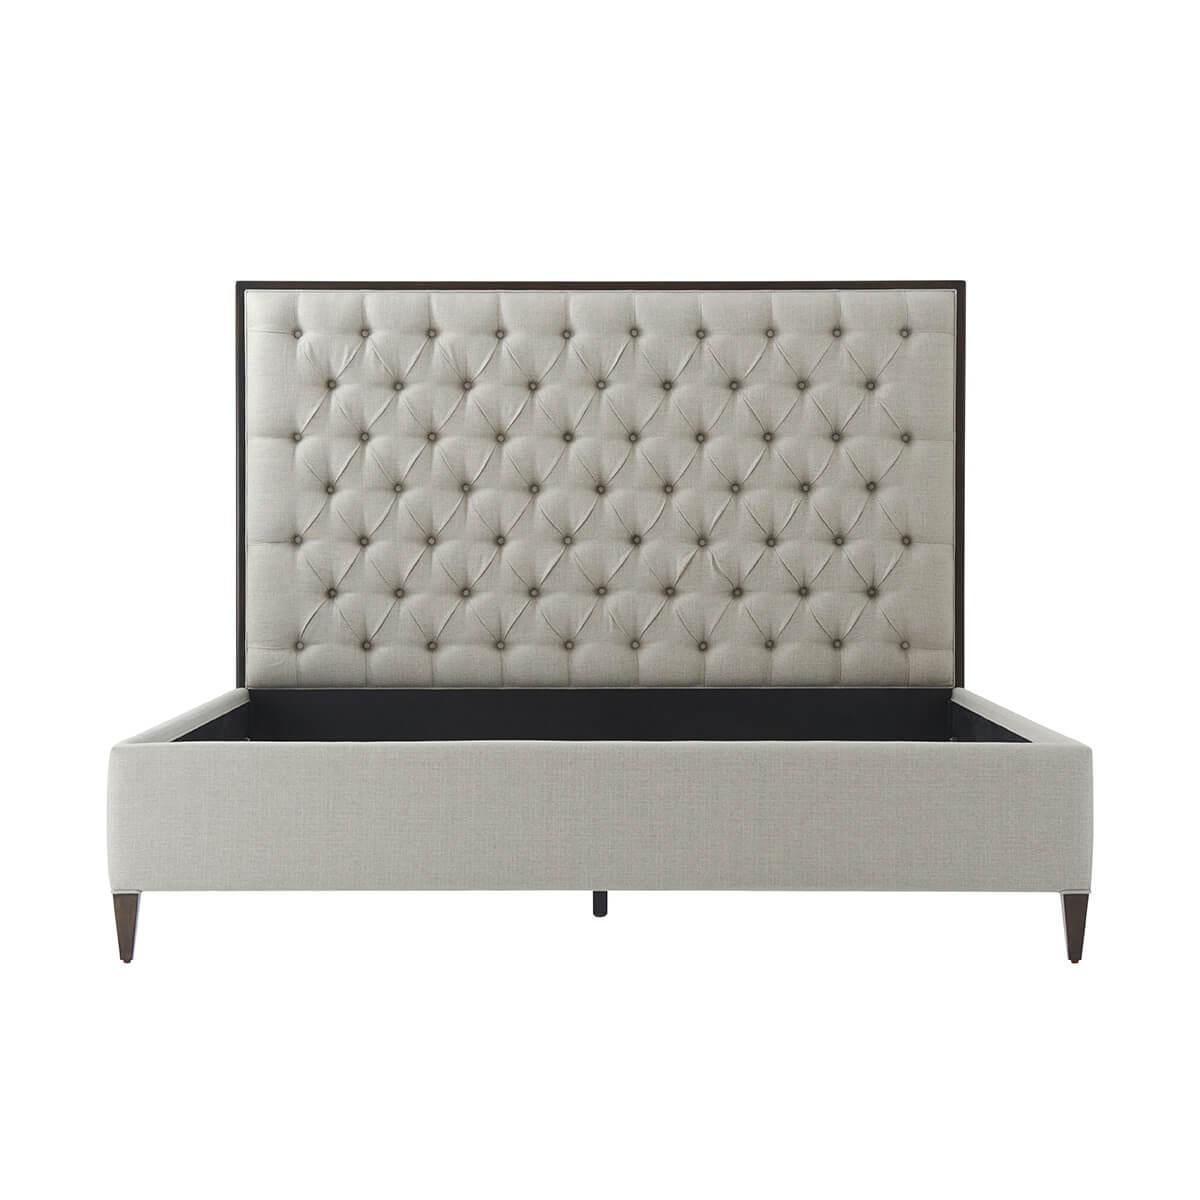 With a tufted panel upholstered headboard, solid beech frame in our Ossian finish with upholstered rails and raised on square tapered legs.

Dimensions: 80.75